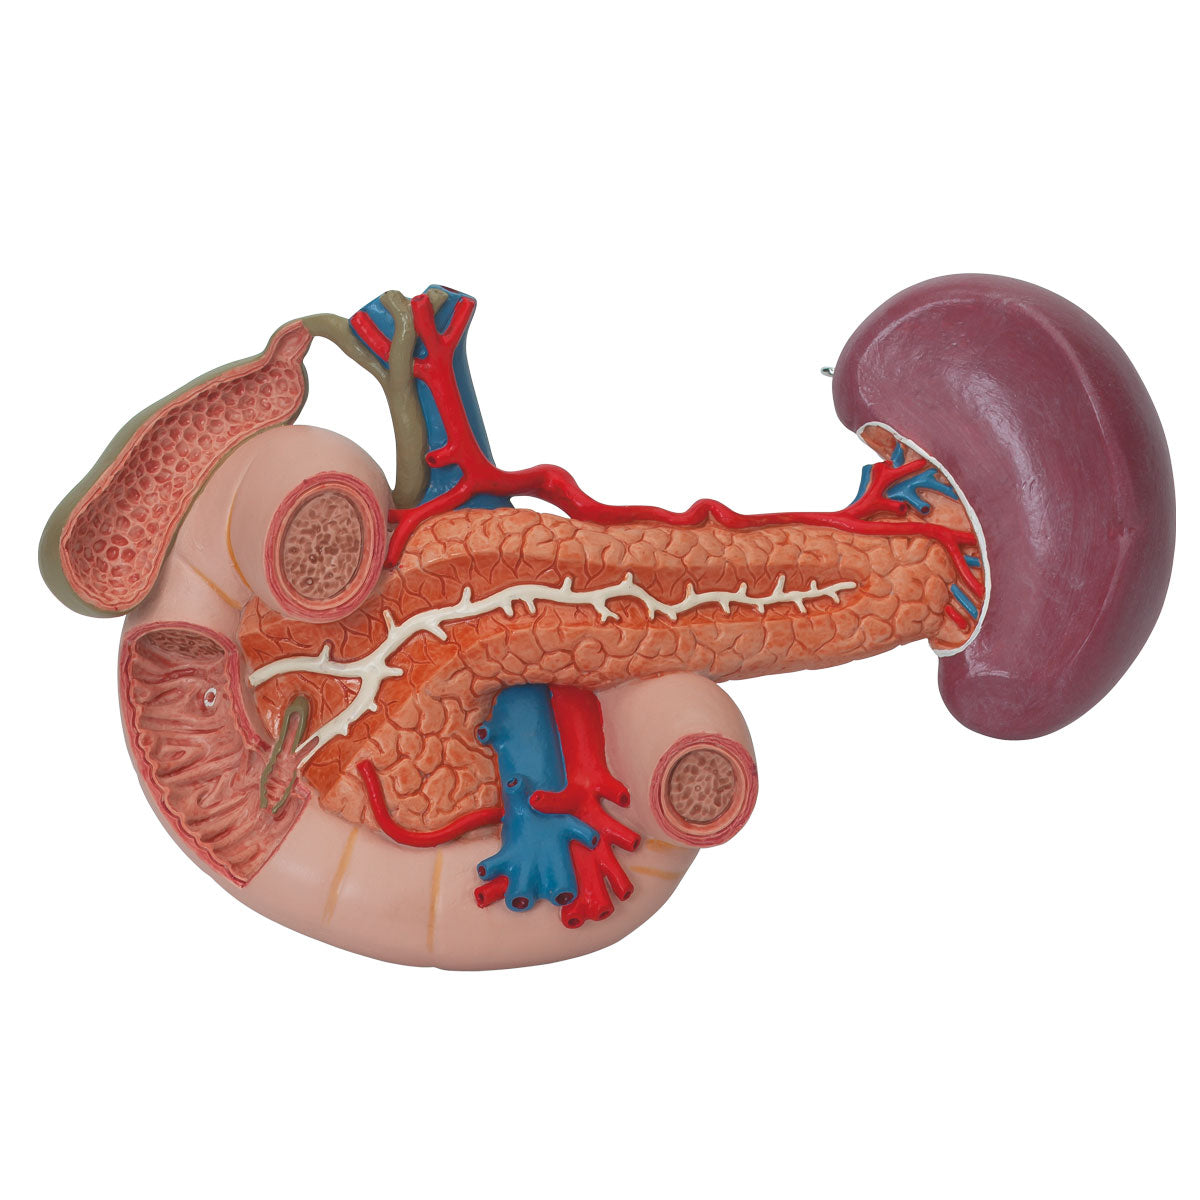 Detailed model of the duodenum and the relationship of the pancreas to other organs - can be separated into 3 parts